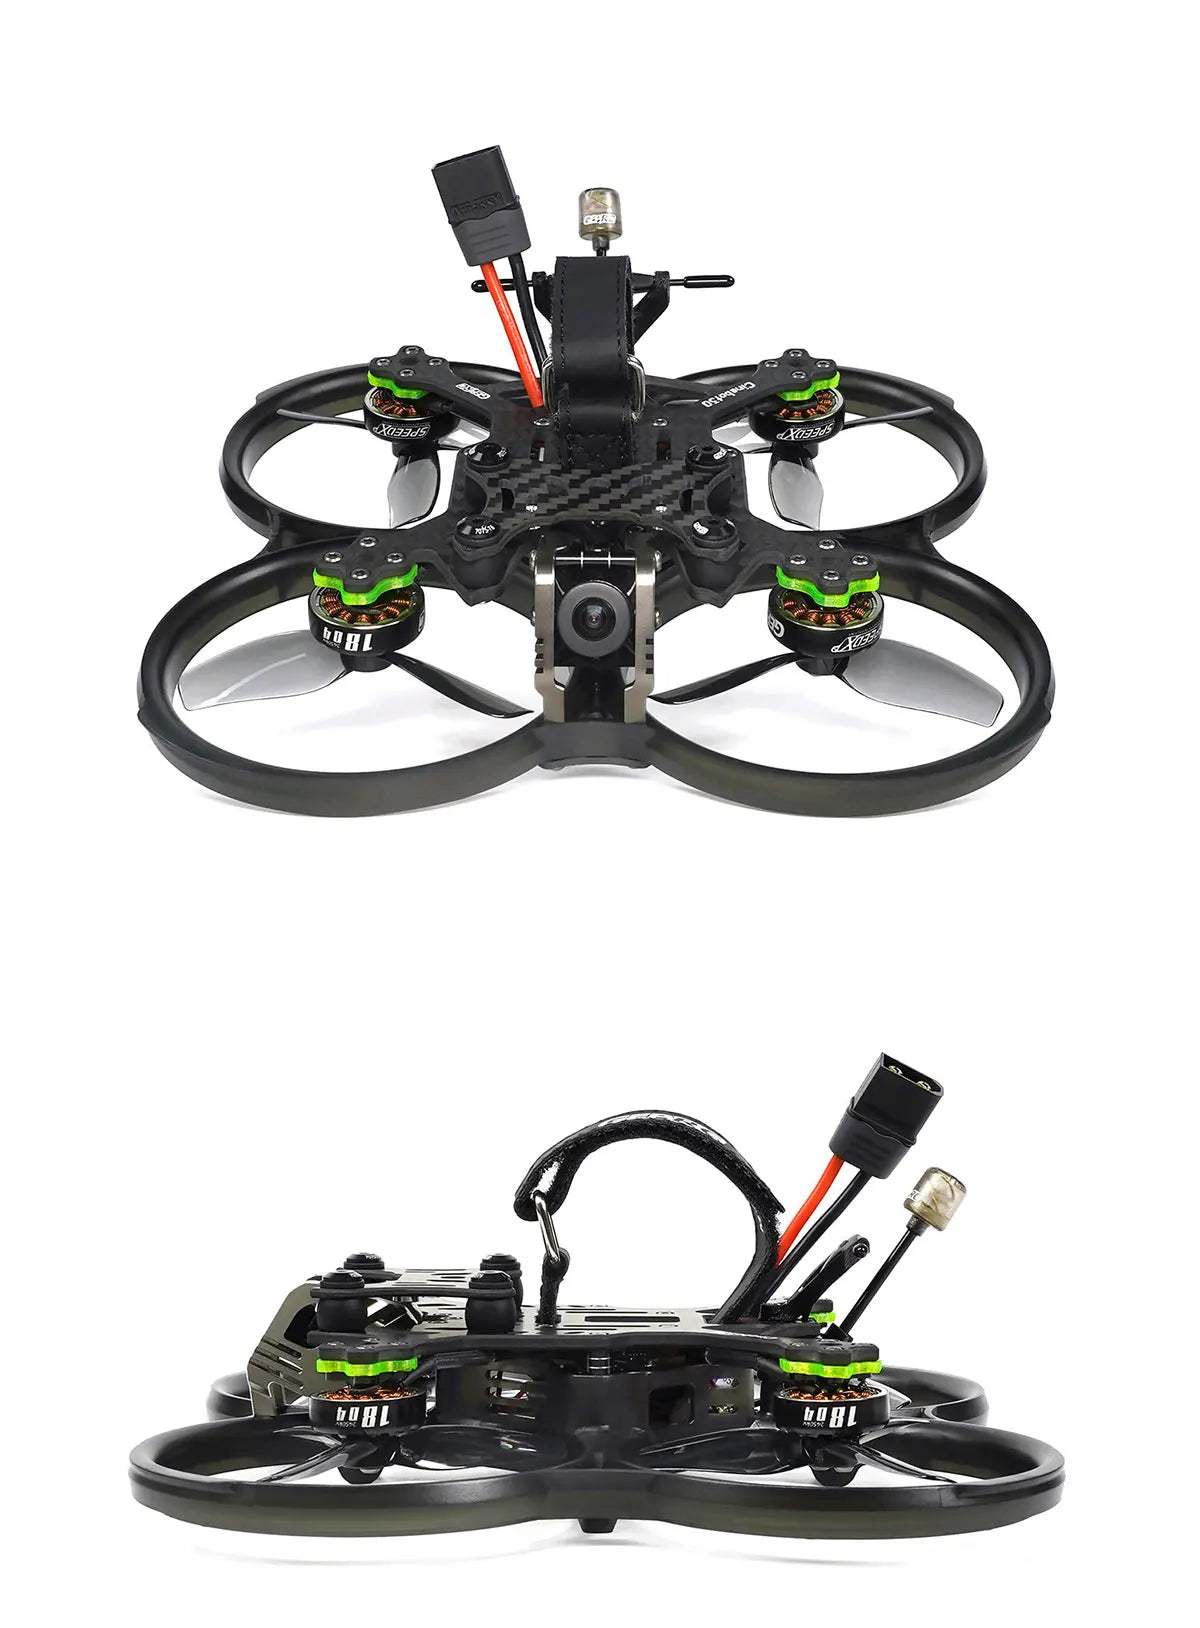 GEPRC Cinebot30 FPV Drone, can I use my own FPV goggles with the HD Vista Nebula PRO